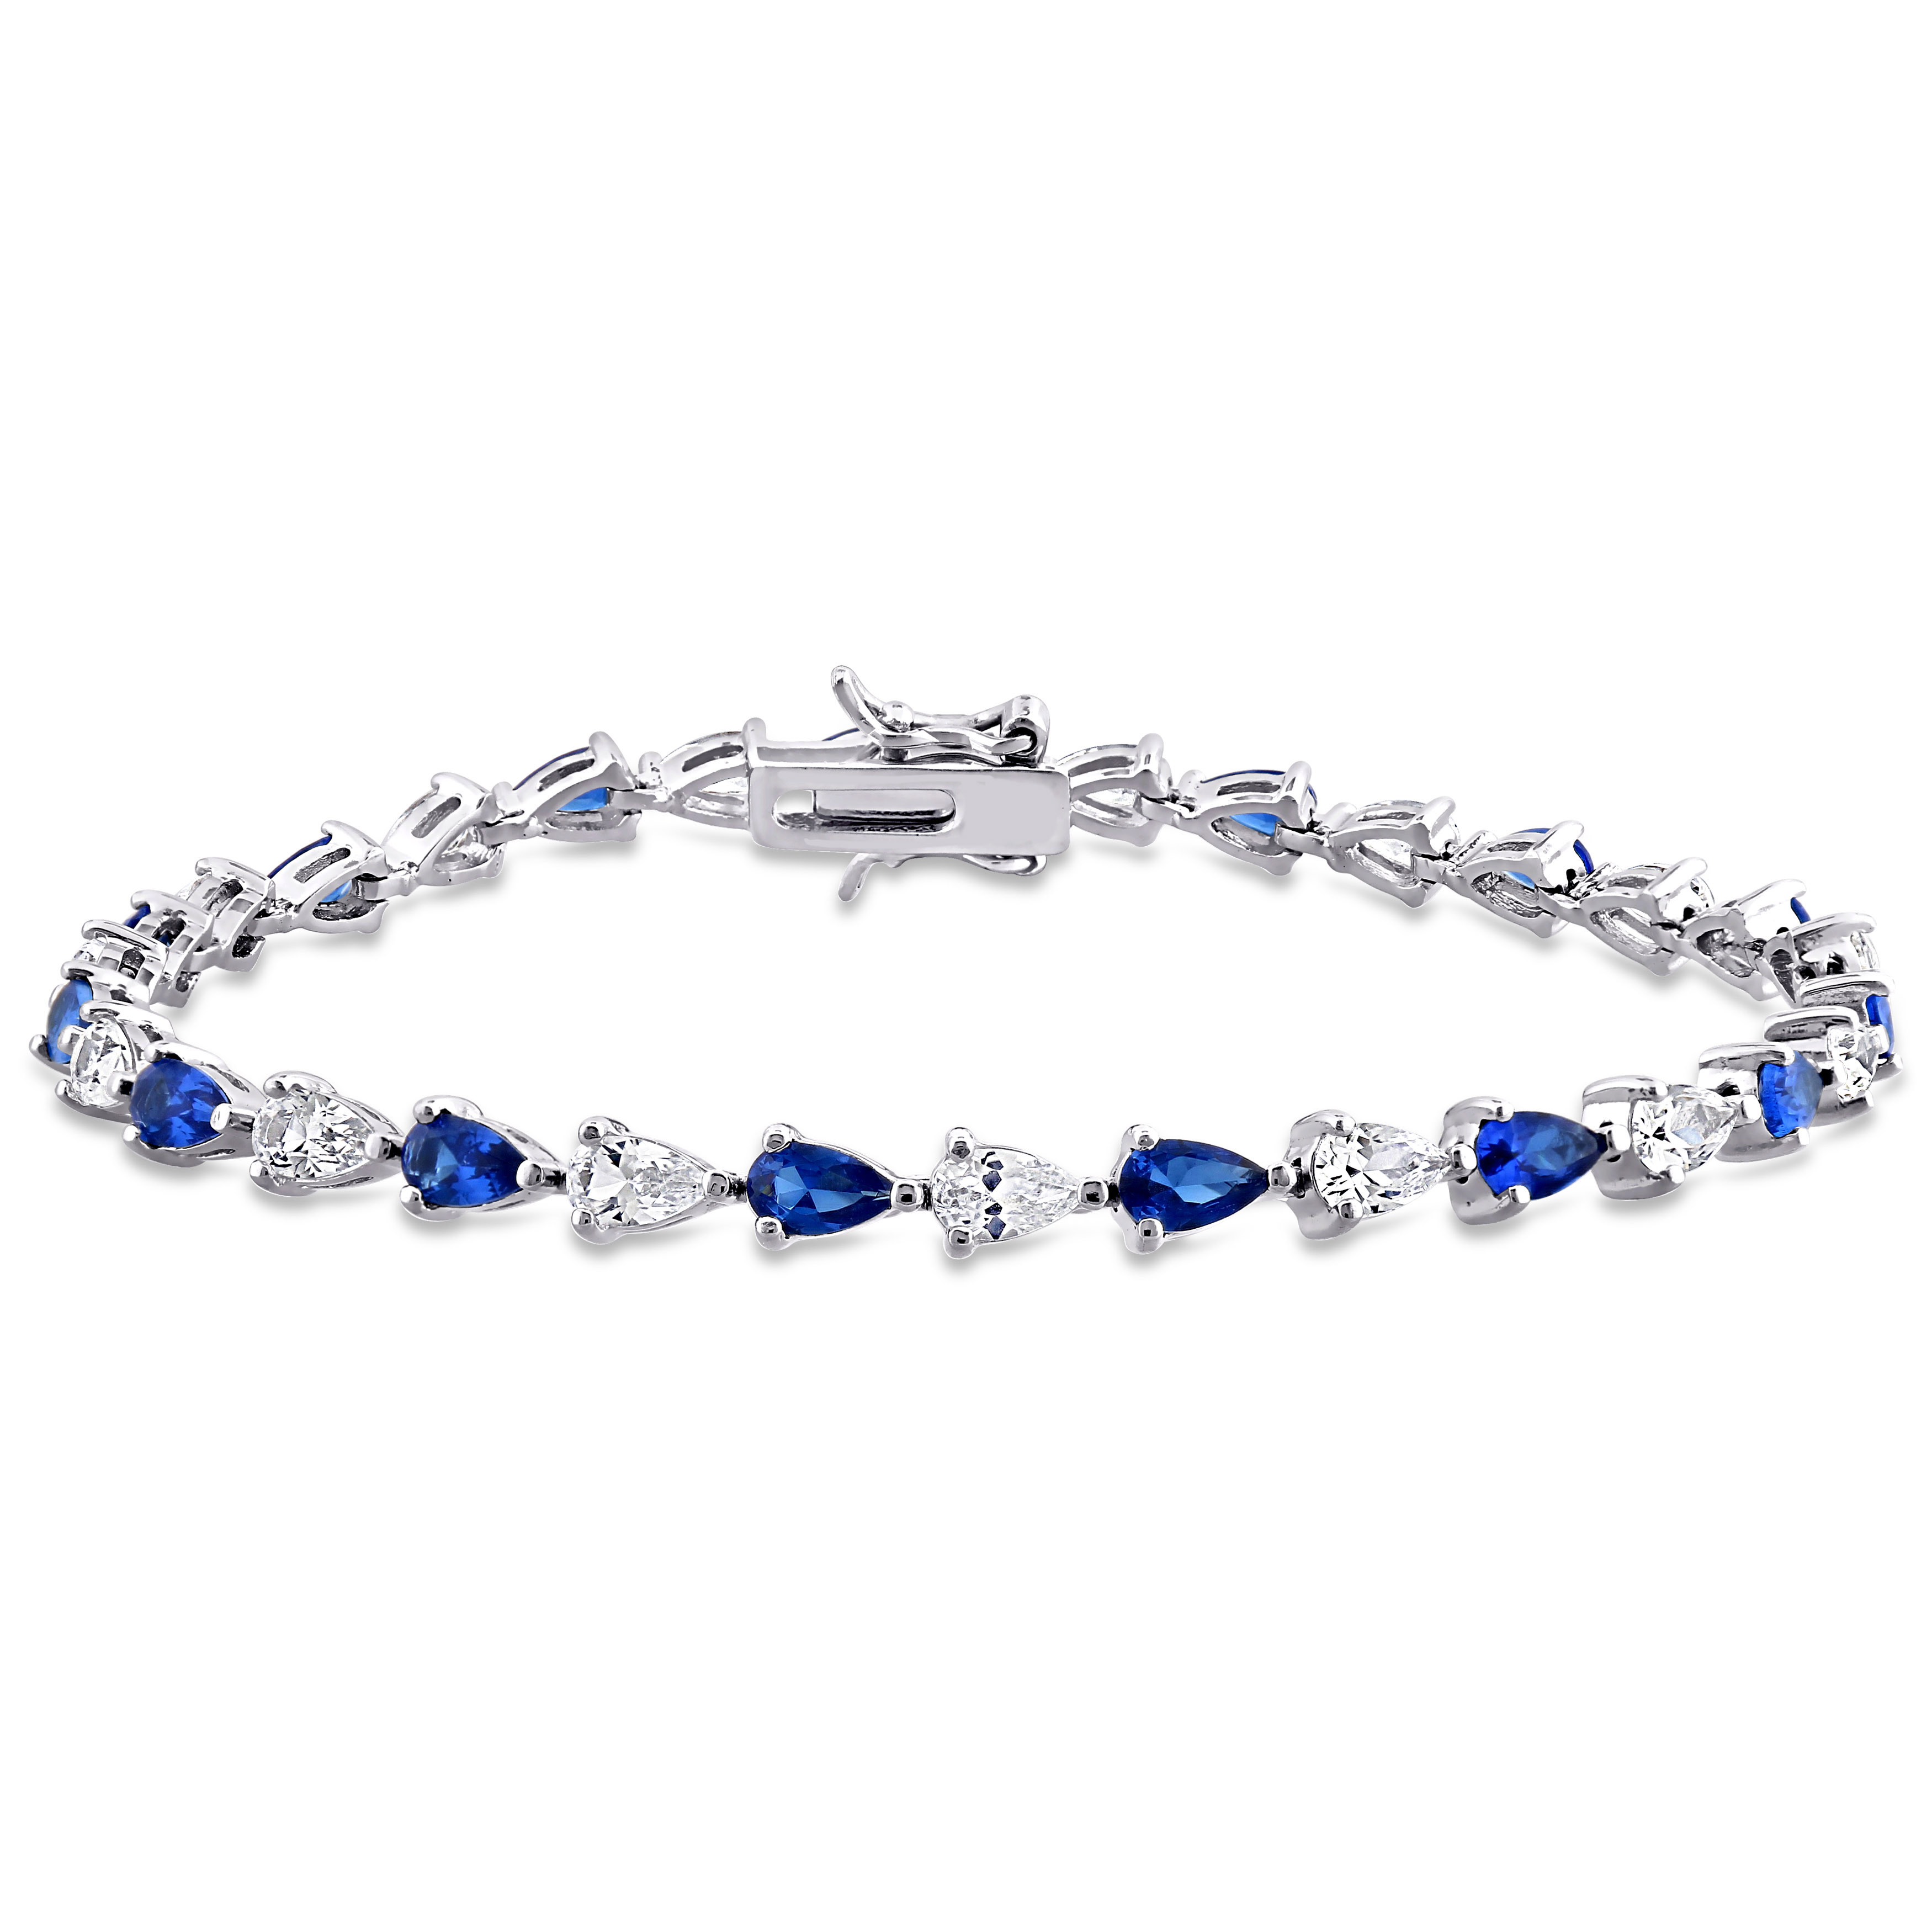 10 1/2 CT TGW Pear Shape Created Blue and White Sapphire Tennis Bracelet in Sterling Silver